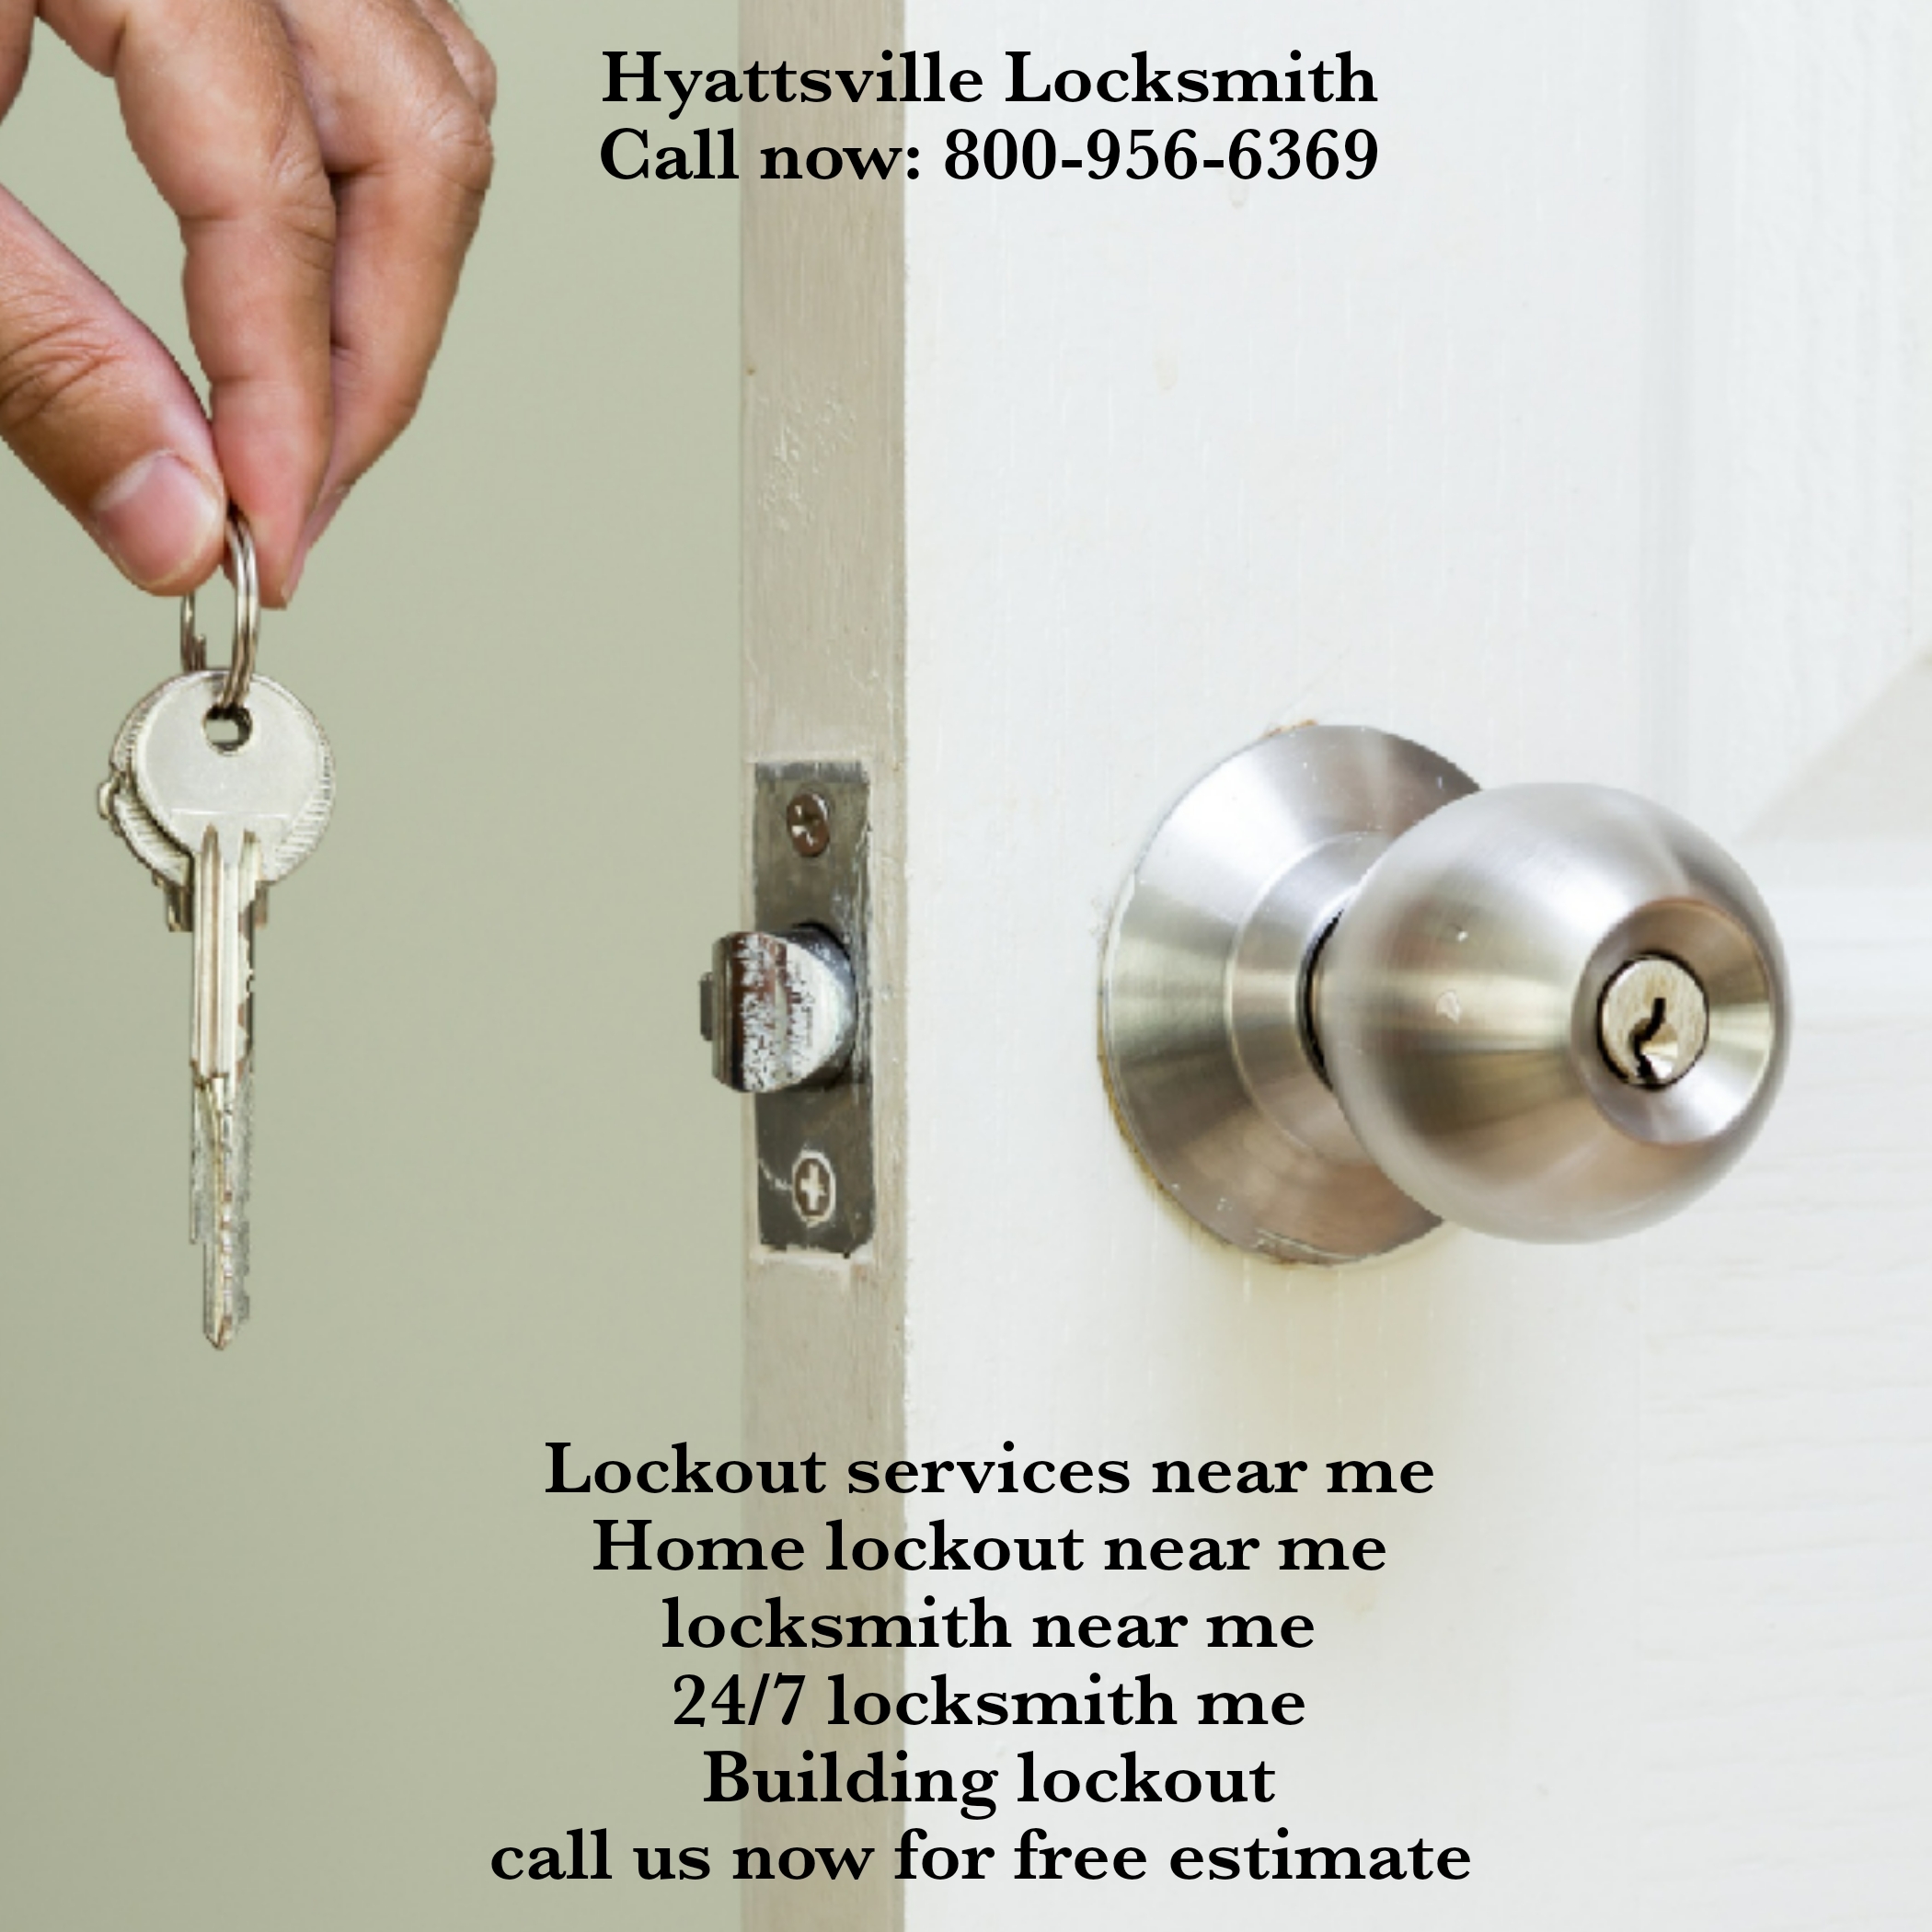 lockout services